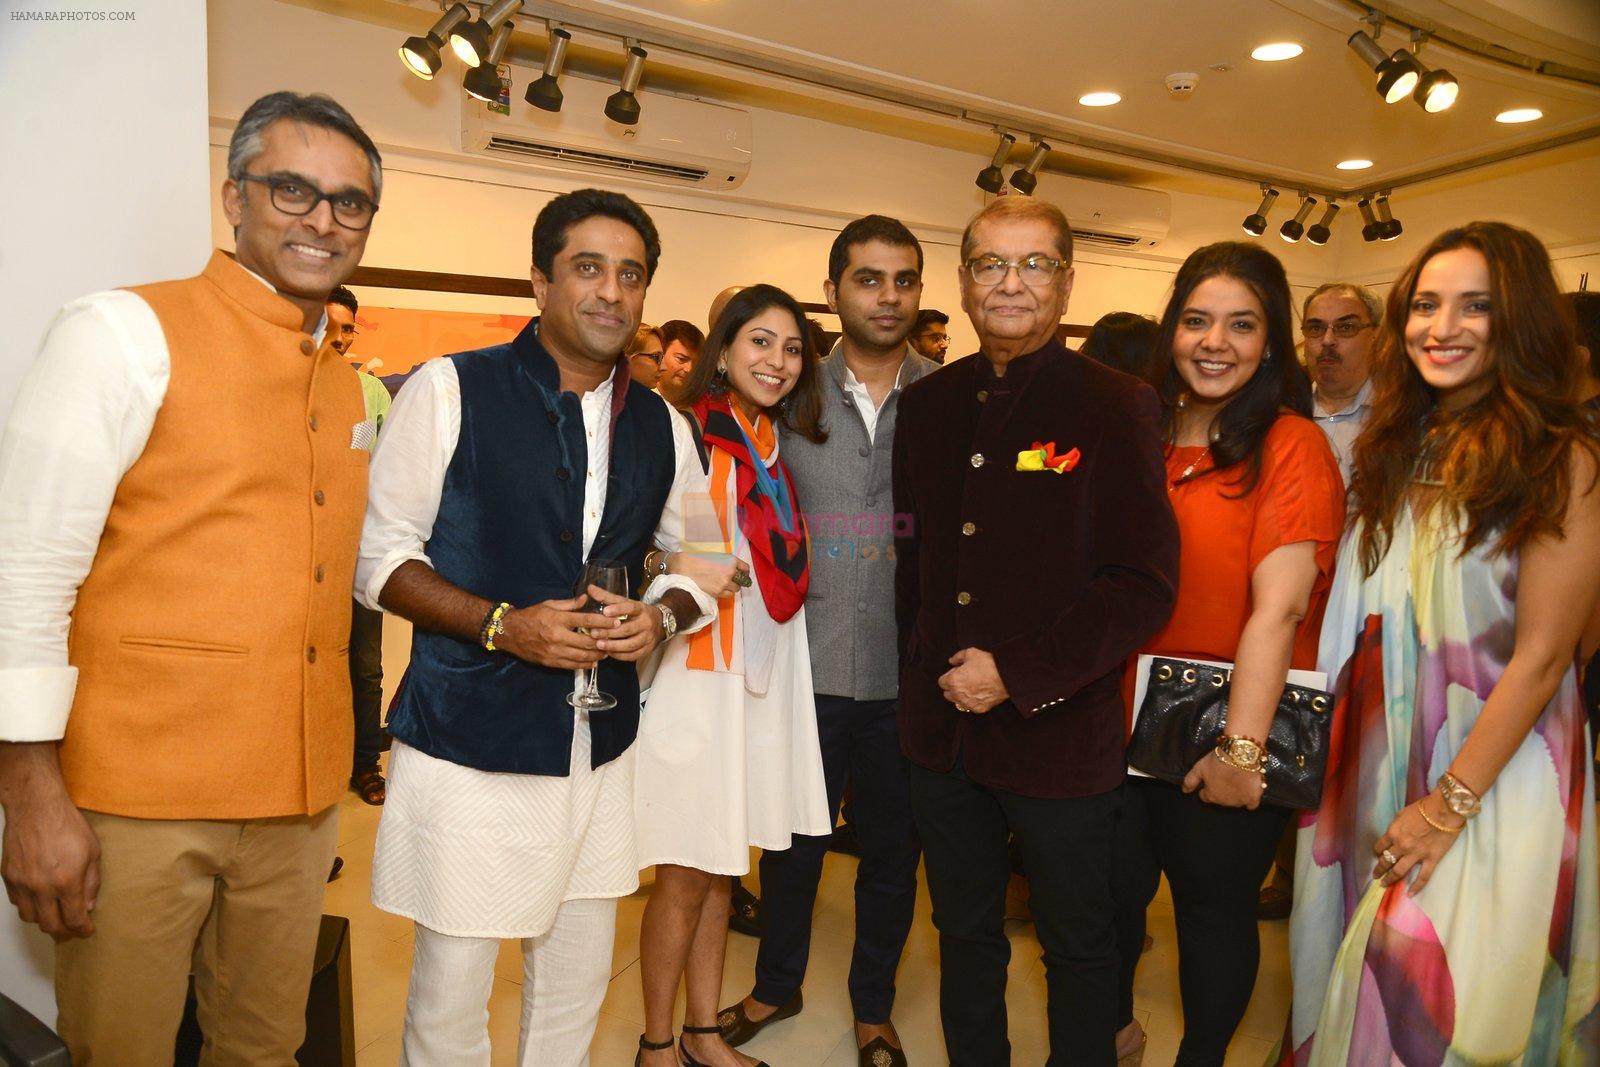 dilip de with fmily at Dilip De's art event on 16th Aug 2016